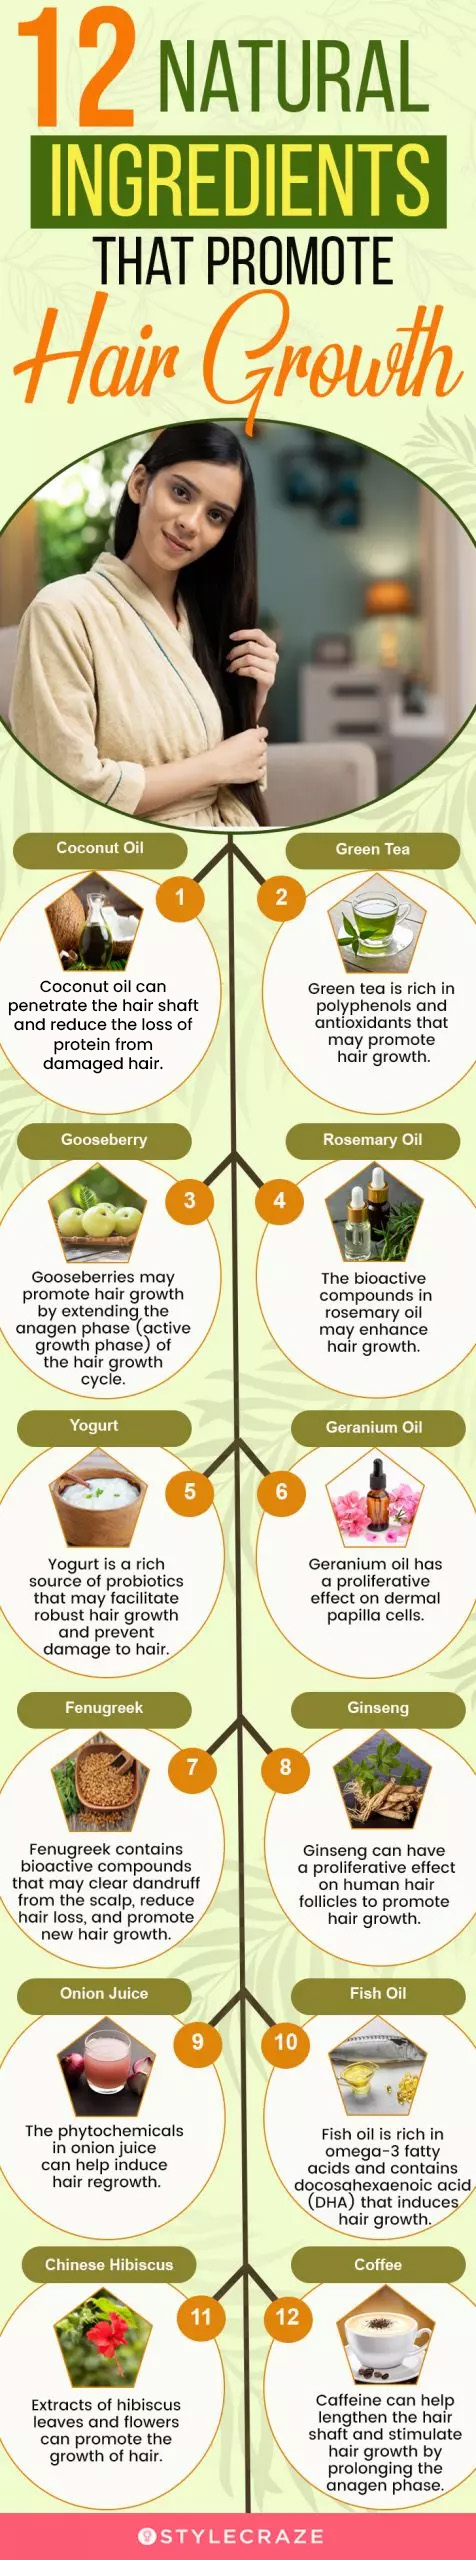 12 natural ingredients that promote hair growth (infographic)